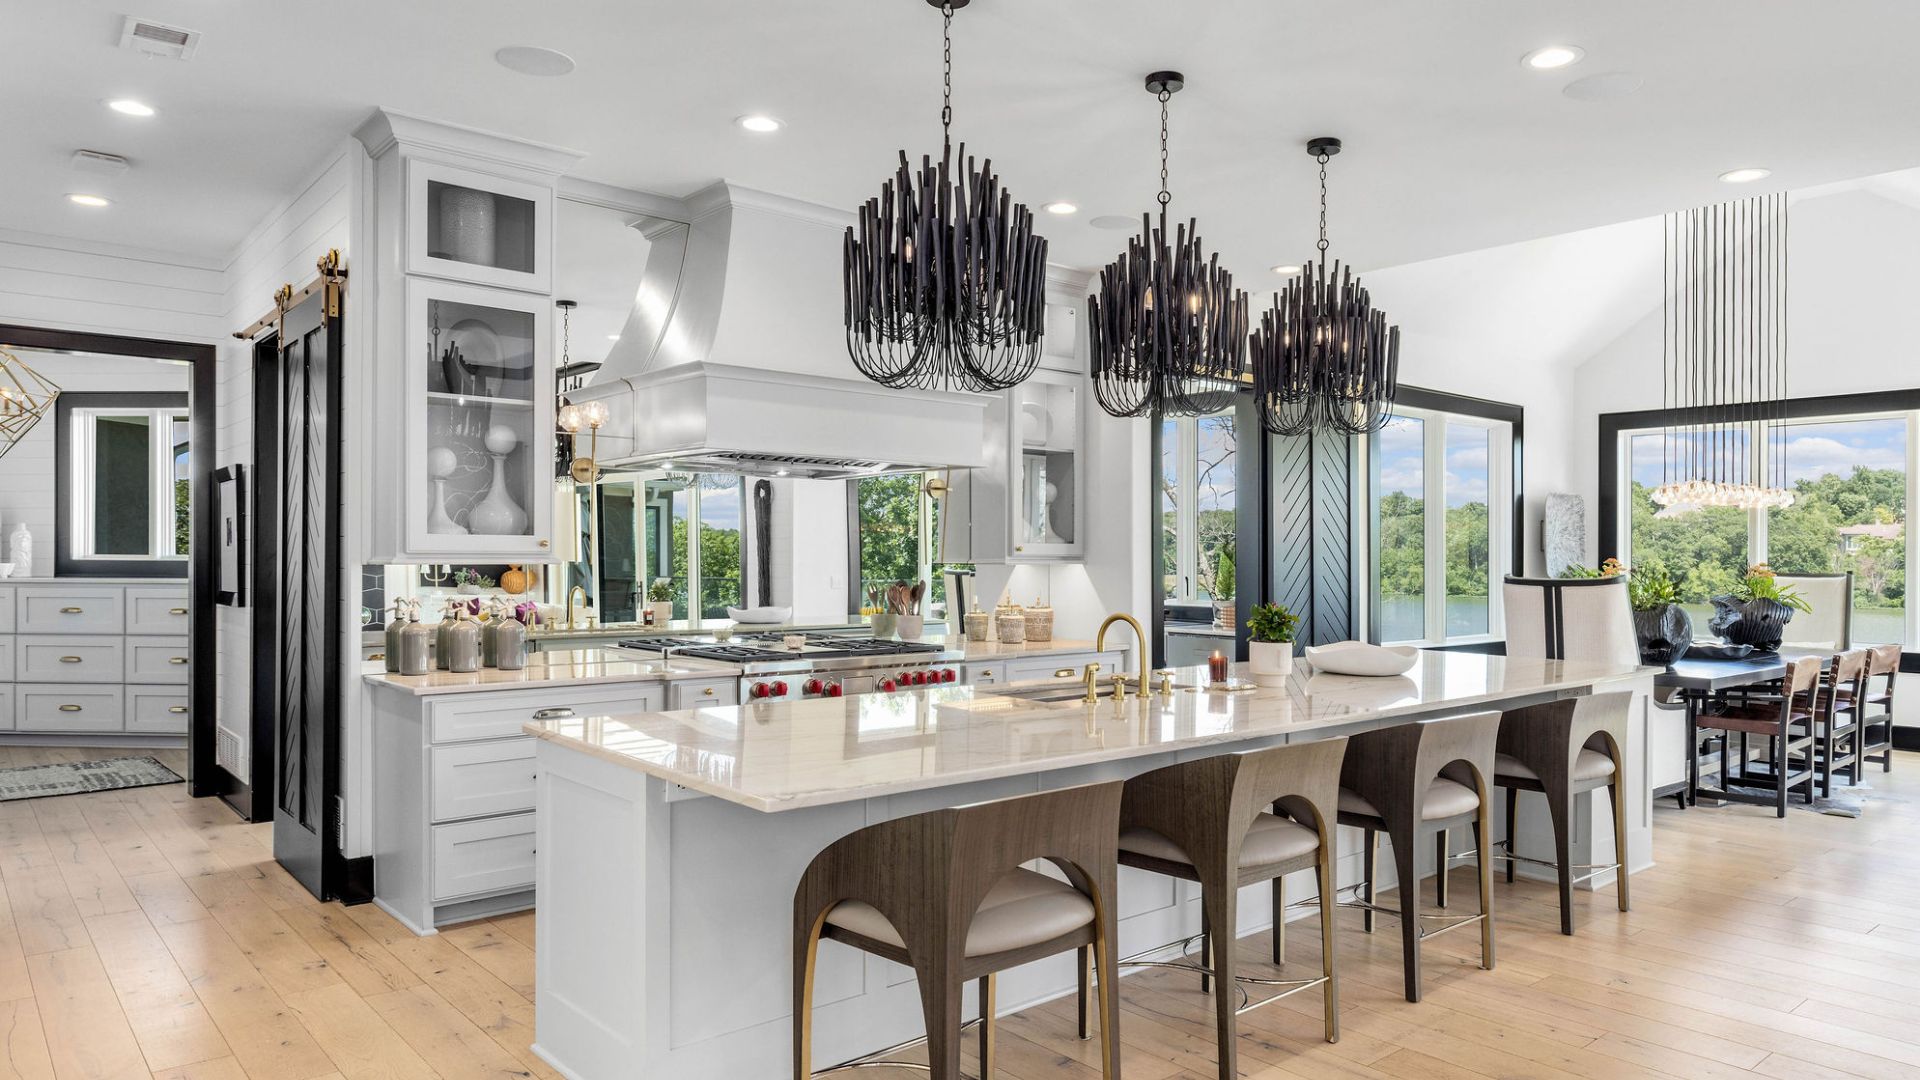 Photo of modern kitchen with striking lights and mirrored accents. Lots of natural light.